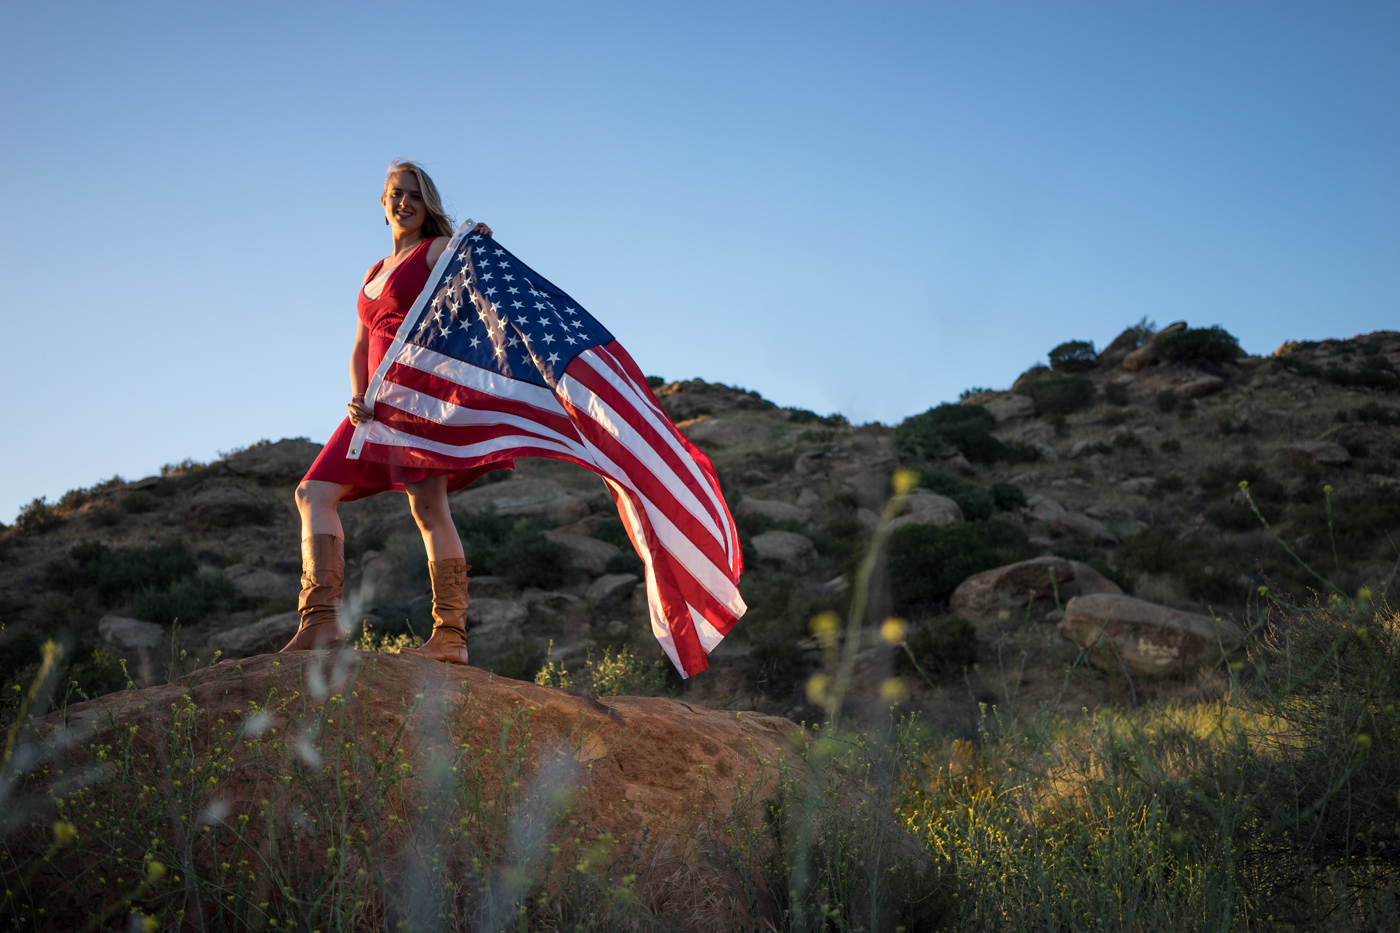 American woman with waving flag portrait in grassy mountain landscape at sunset